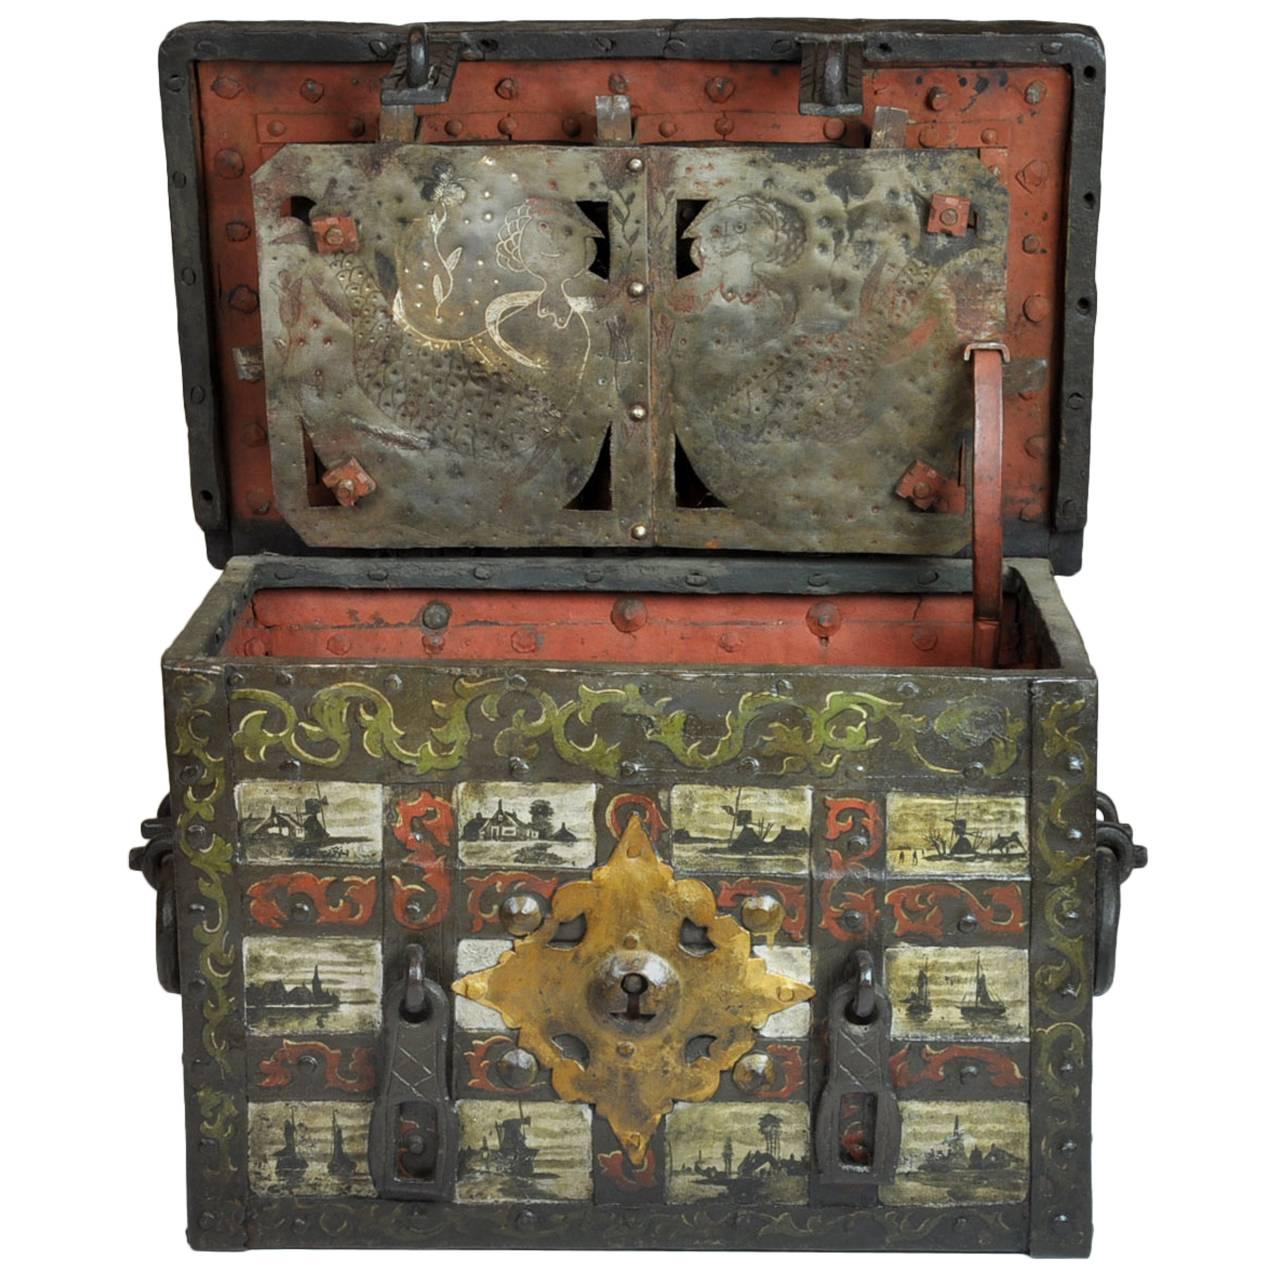 18th-19th Century Spanish Hand-Painted Strongbox/Safe